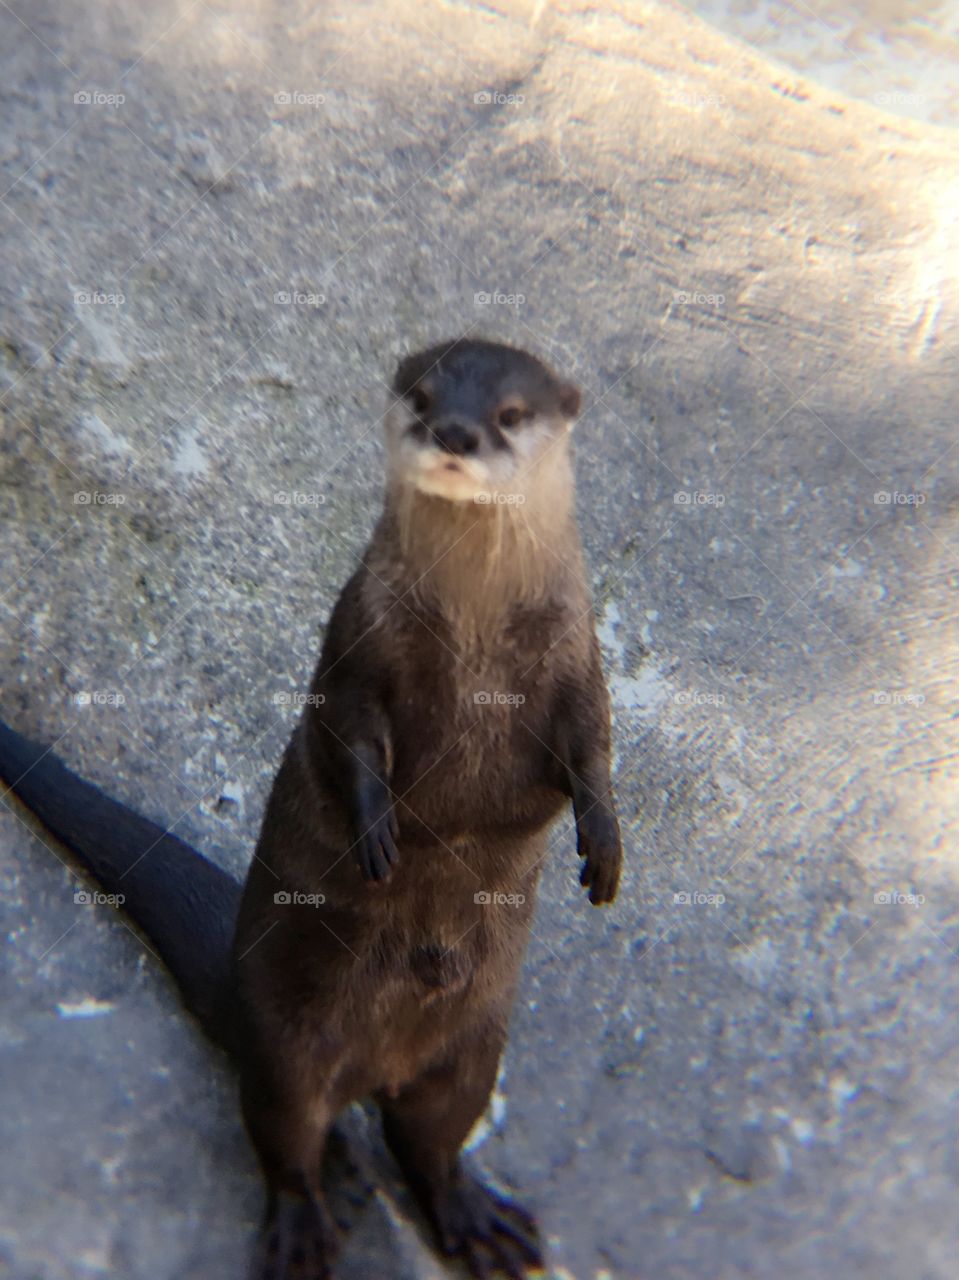 Curious otter